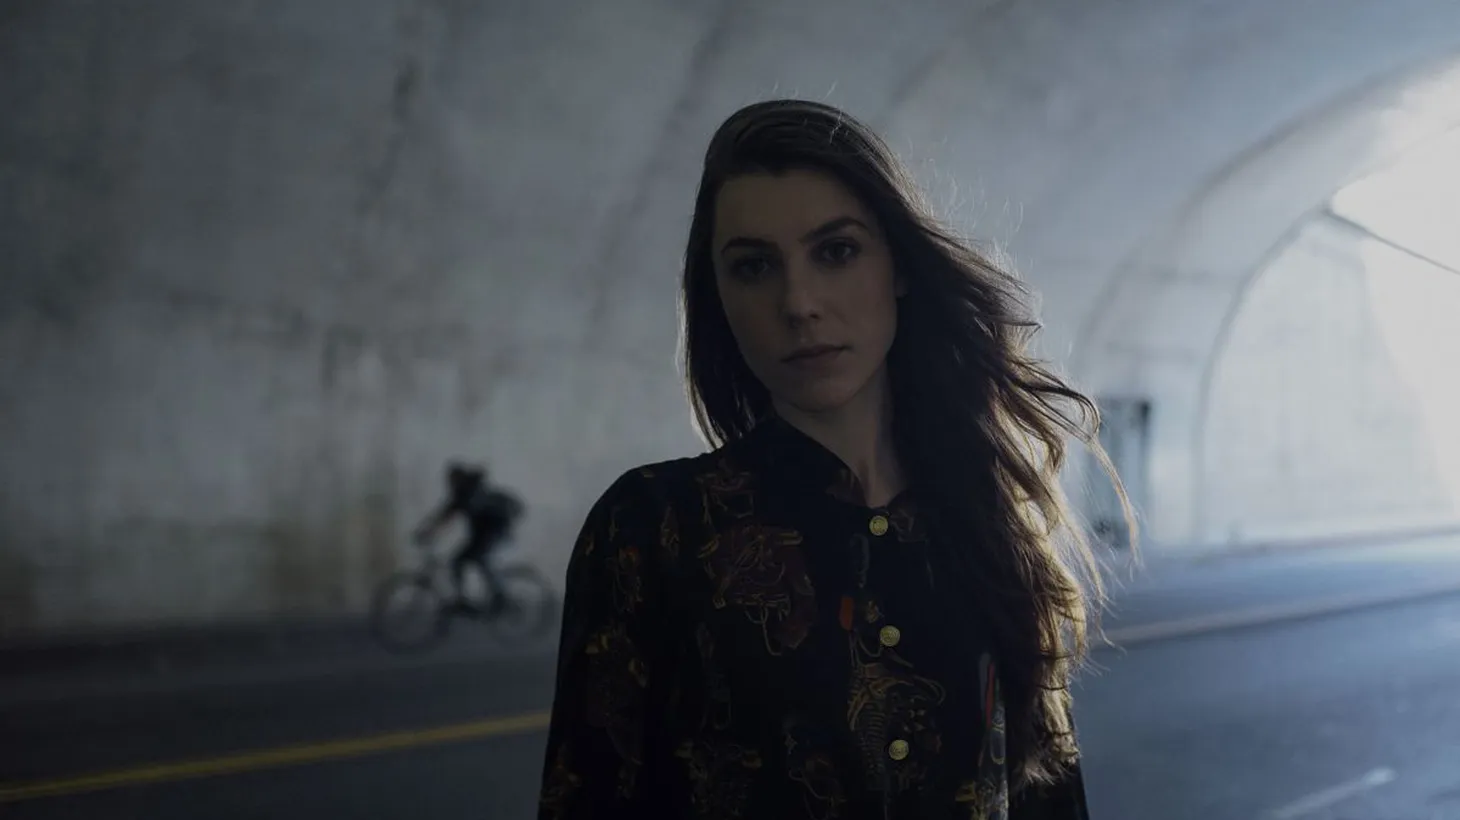 Julia Holter is a Los Angeles-based singer whose experimental pop music has made her a critics' favorite.